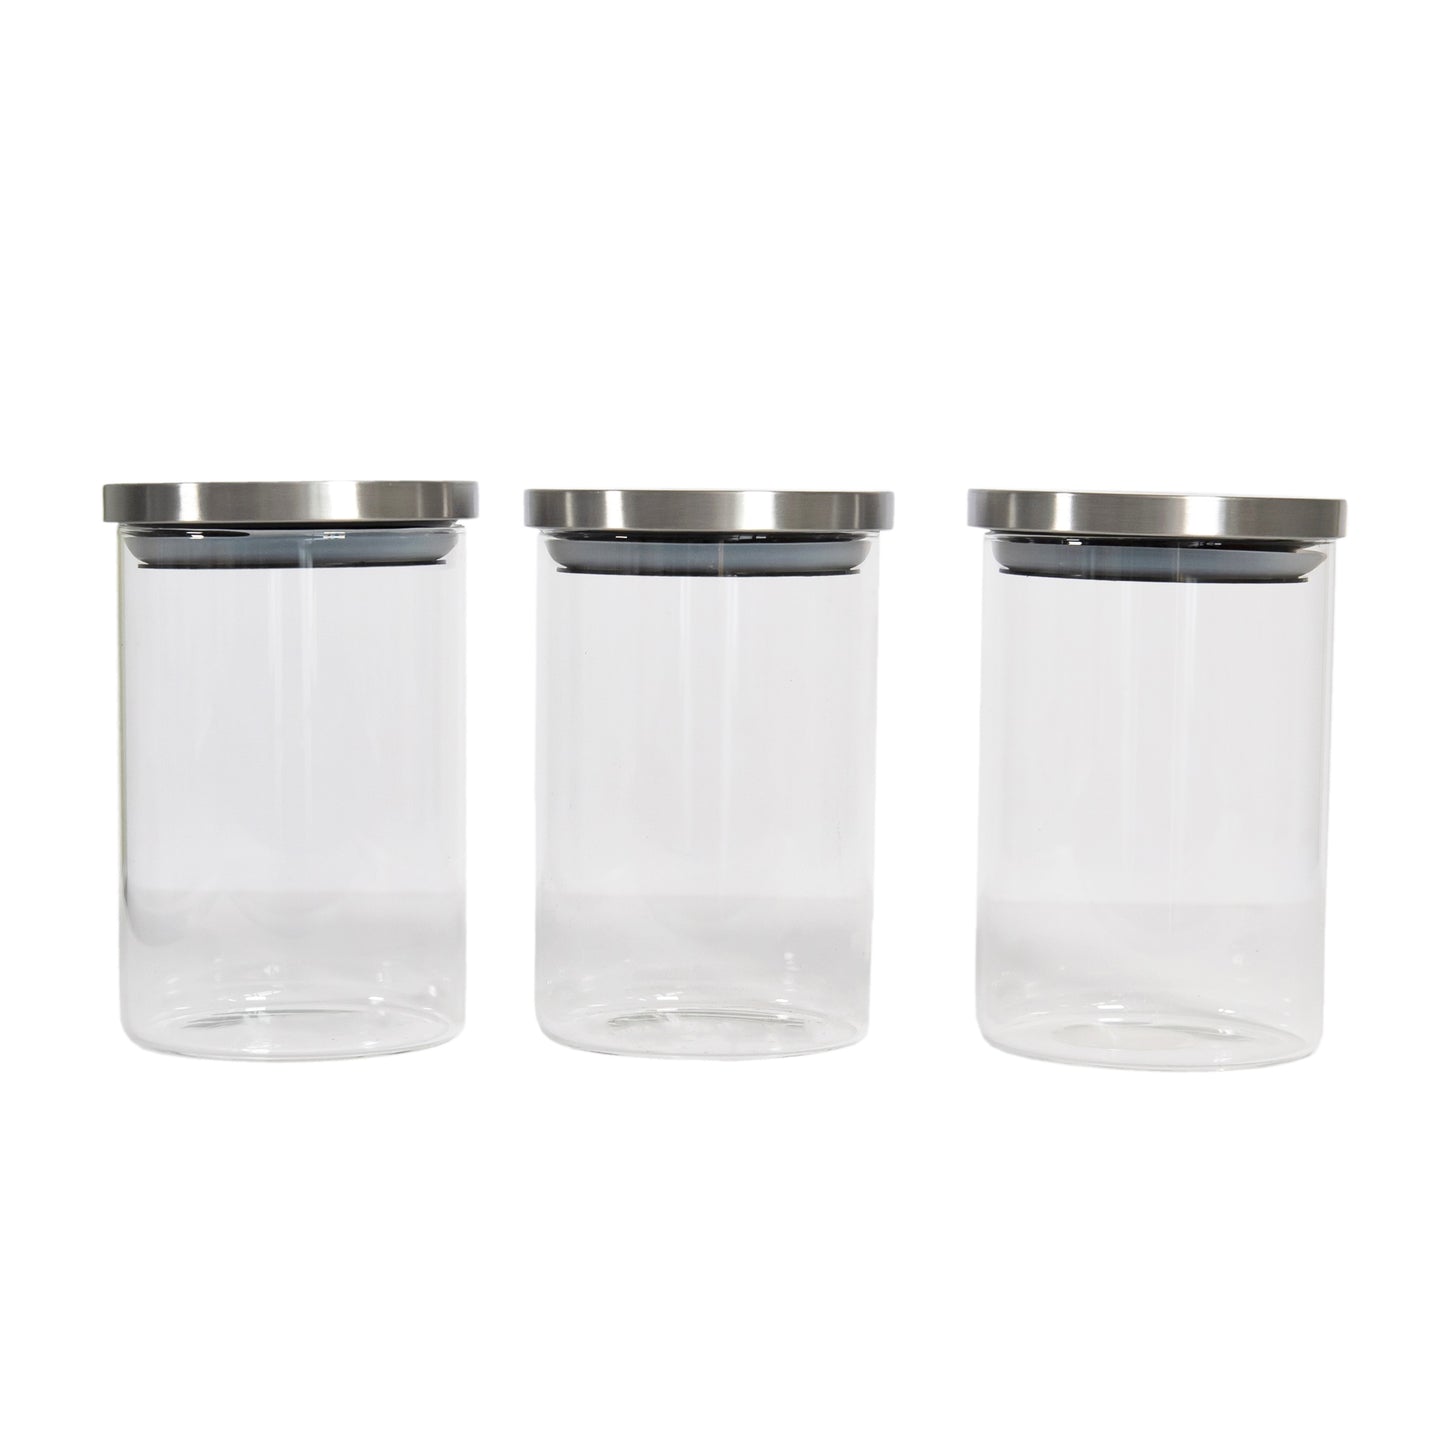 Set of 3 Glass Canisters with Silver Airtight Lids 800ml